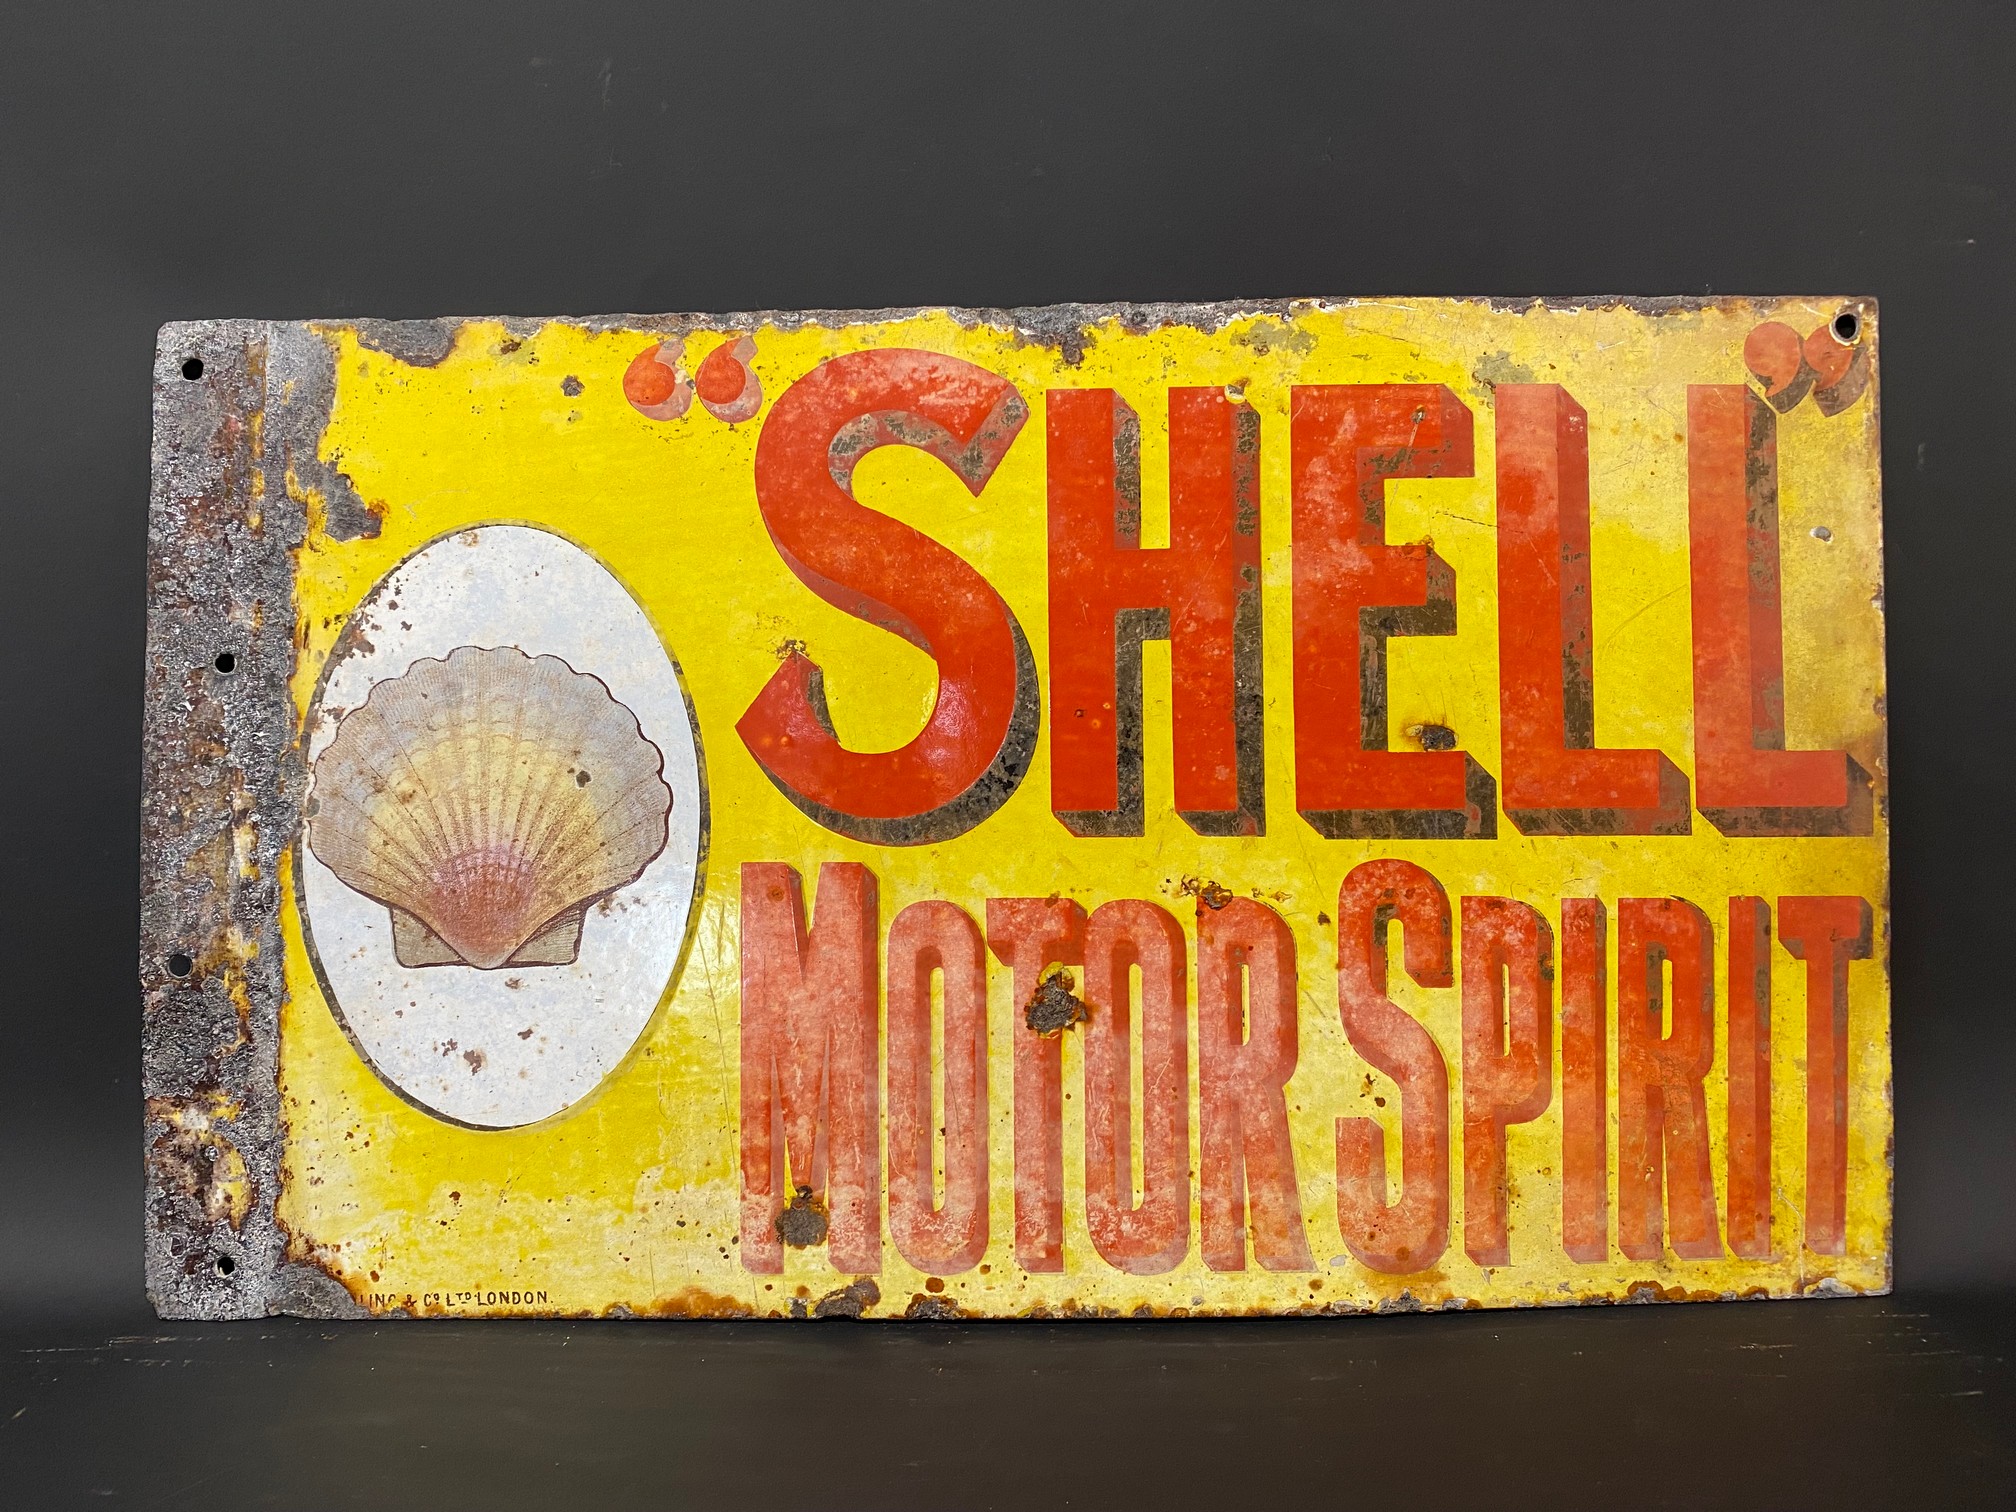 An early Shell Motor Spirit double sided enamel sign with clam motif, made by Willing & Co. Ltd,